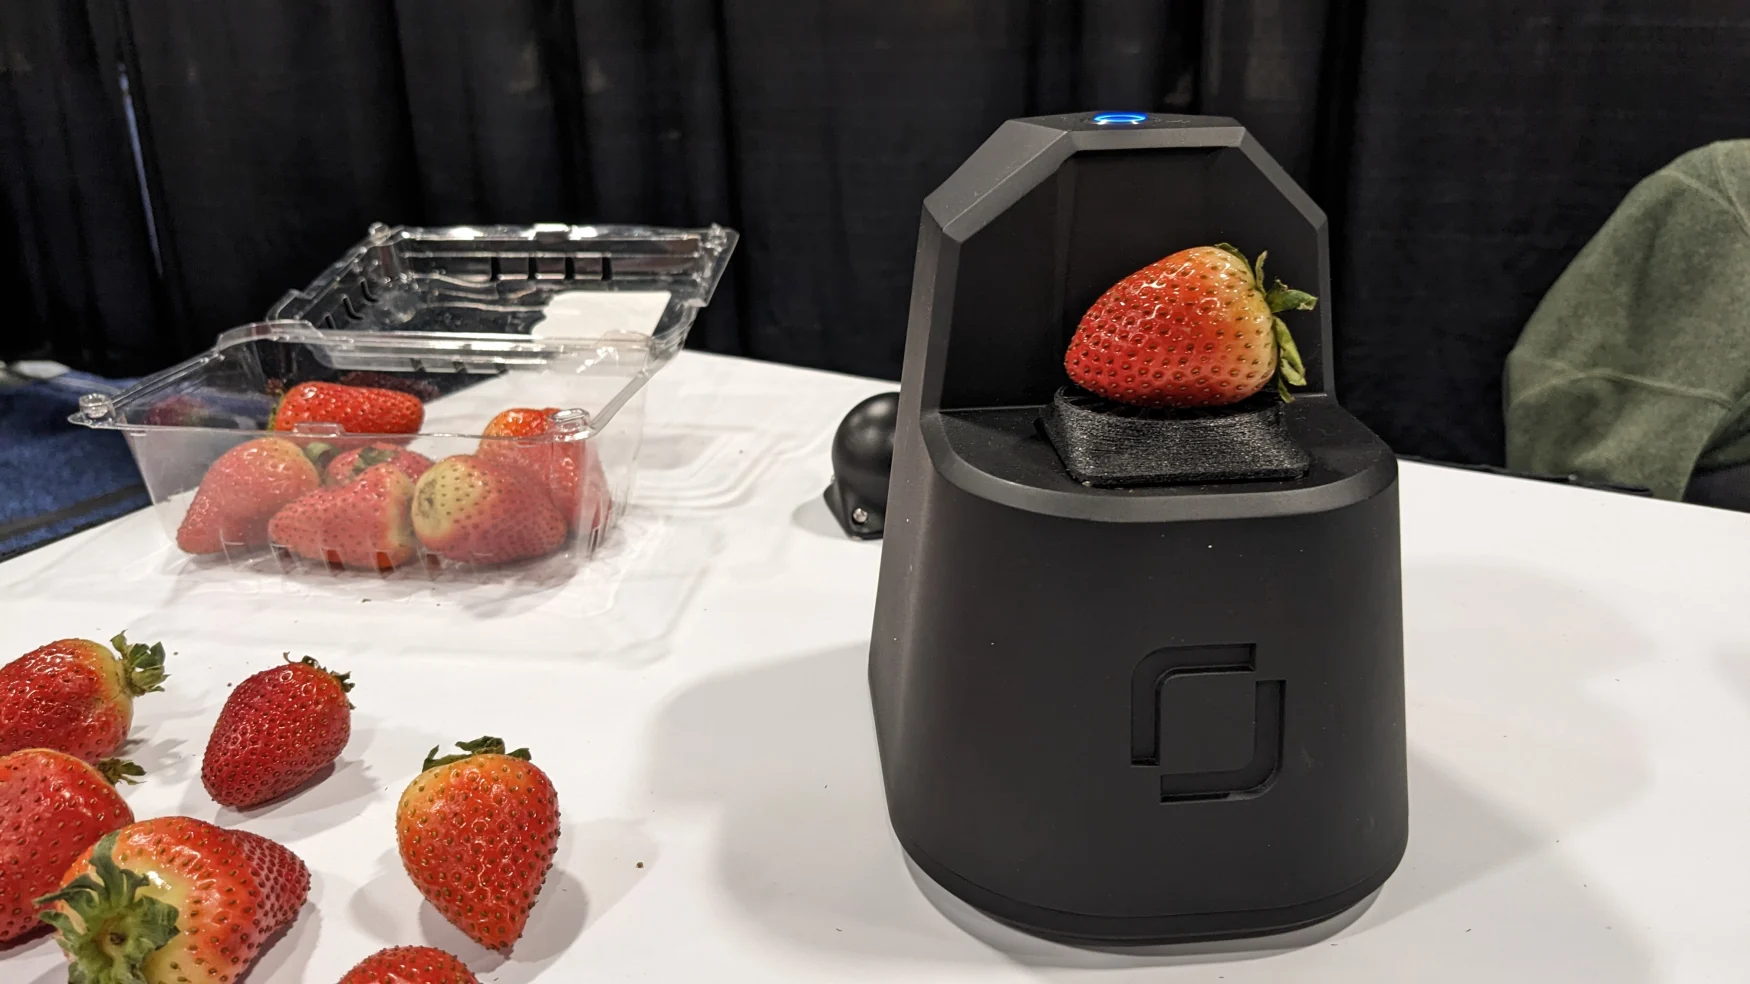 its a black box with a cradle for either strawberries or avocados that blasts a little red light at them and tells you if they're sufficiently squishy.